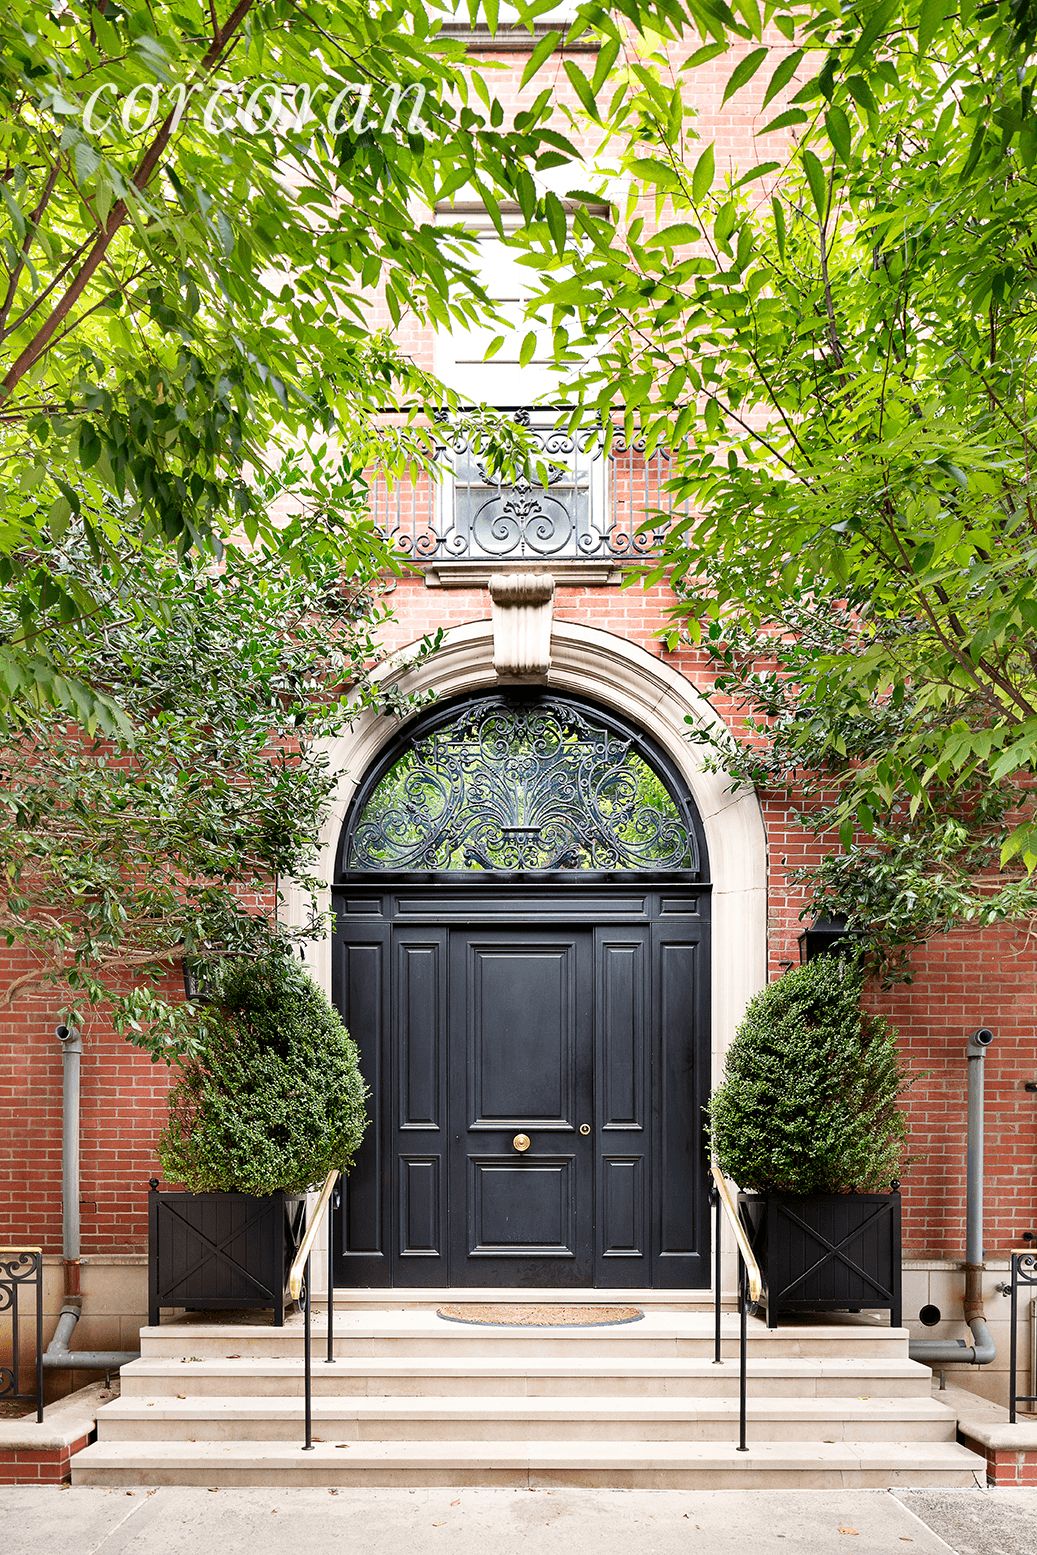 London in New York ! Pass through the stately front doors and into the unparalleled grandeur that is 7 Sutton Square.